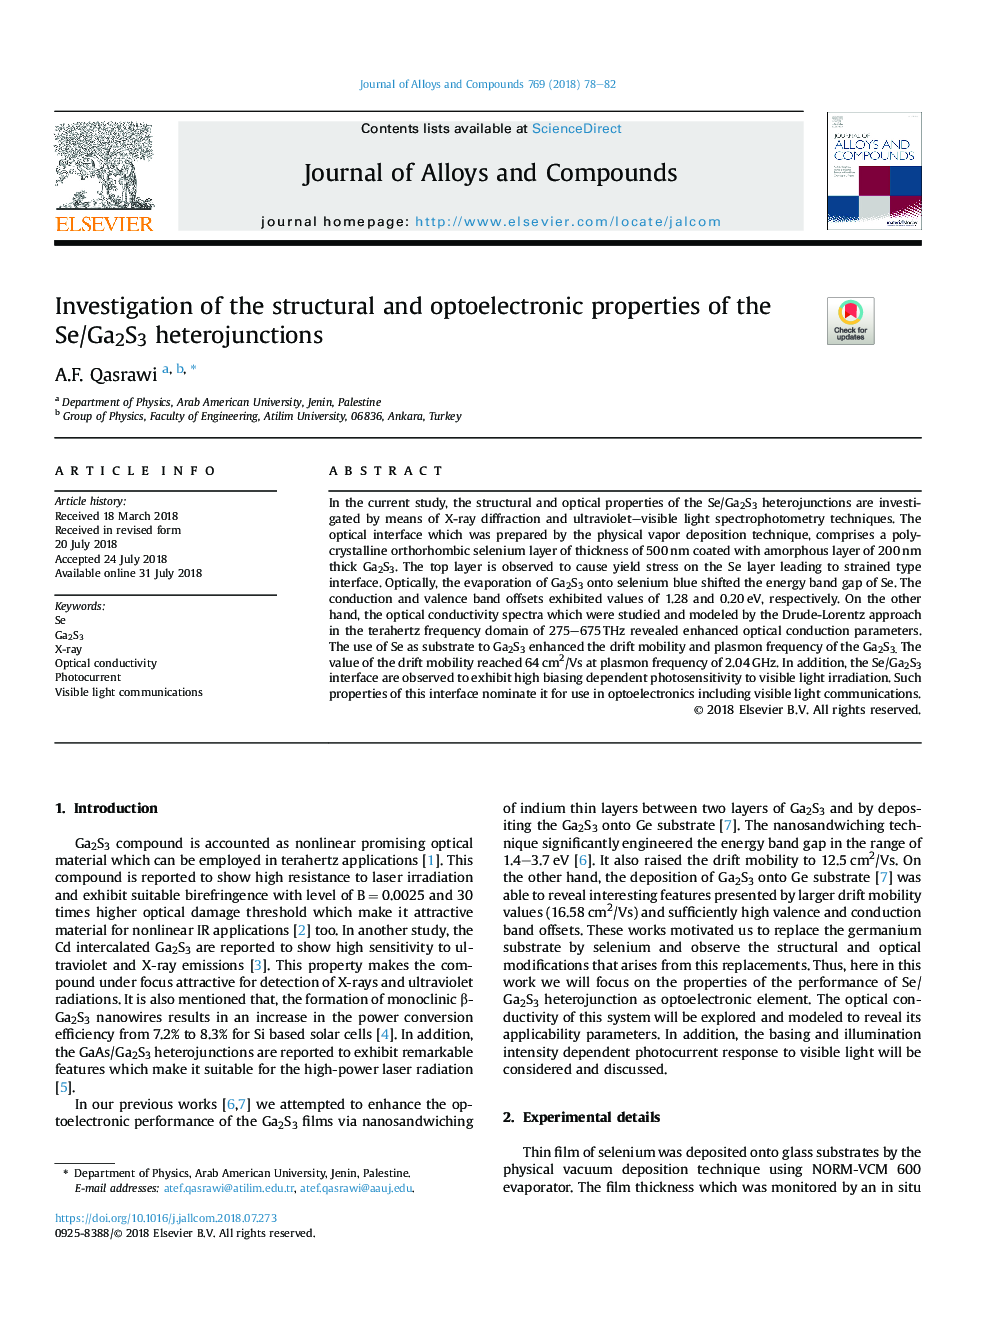 Investigation of the structural and optoelectronic properties of the Se/Ga2S3 heterojunctions